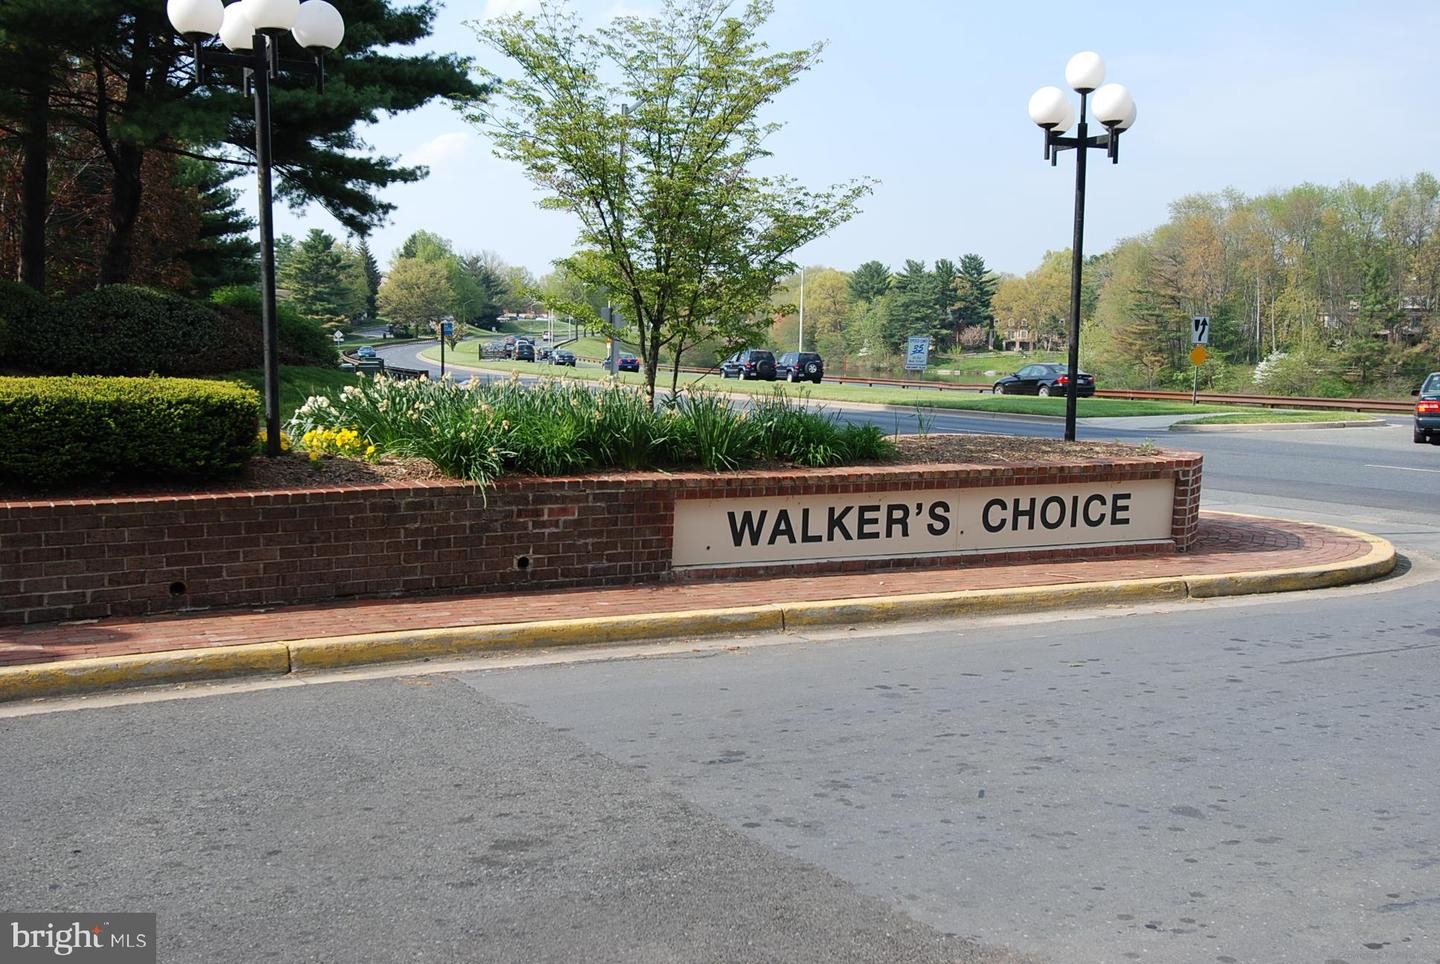 19. Walkers Choice Rd 